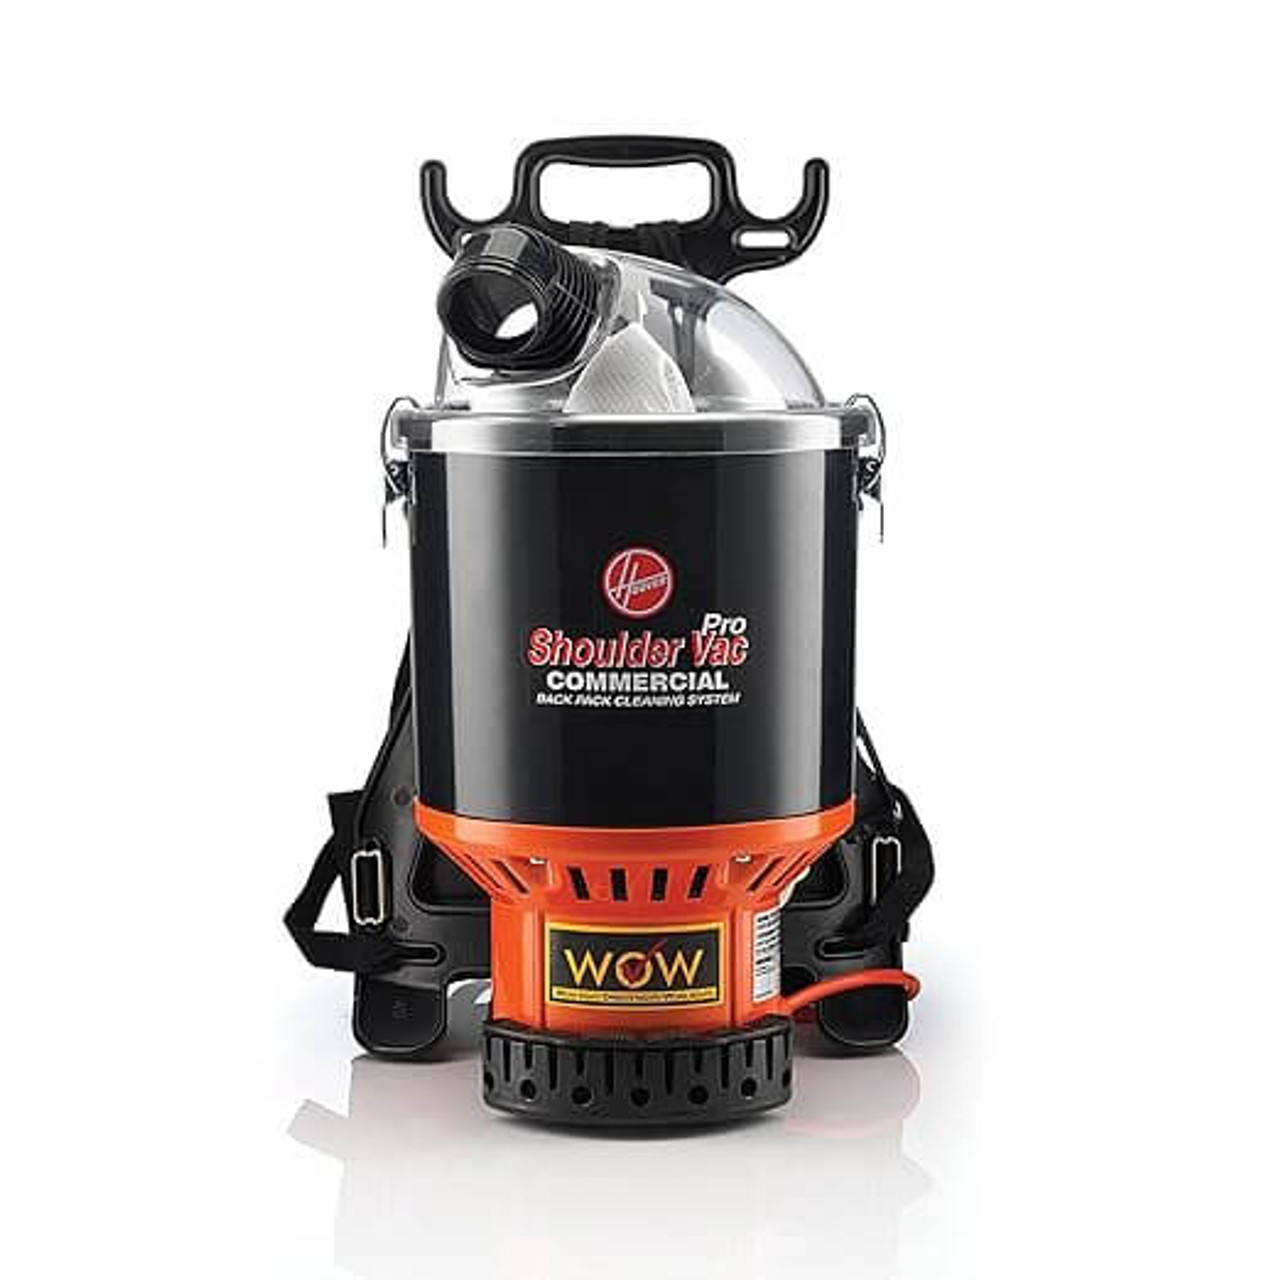 hoover Hoover 6.4 Qt. Commercial Backpack Vacuum Cleaner with 1 1/2" Attachments | Efficient Cleaning and Comfortable Mobility